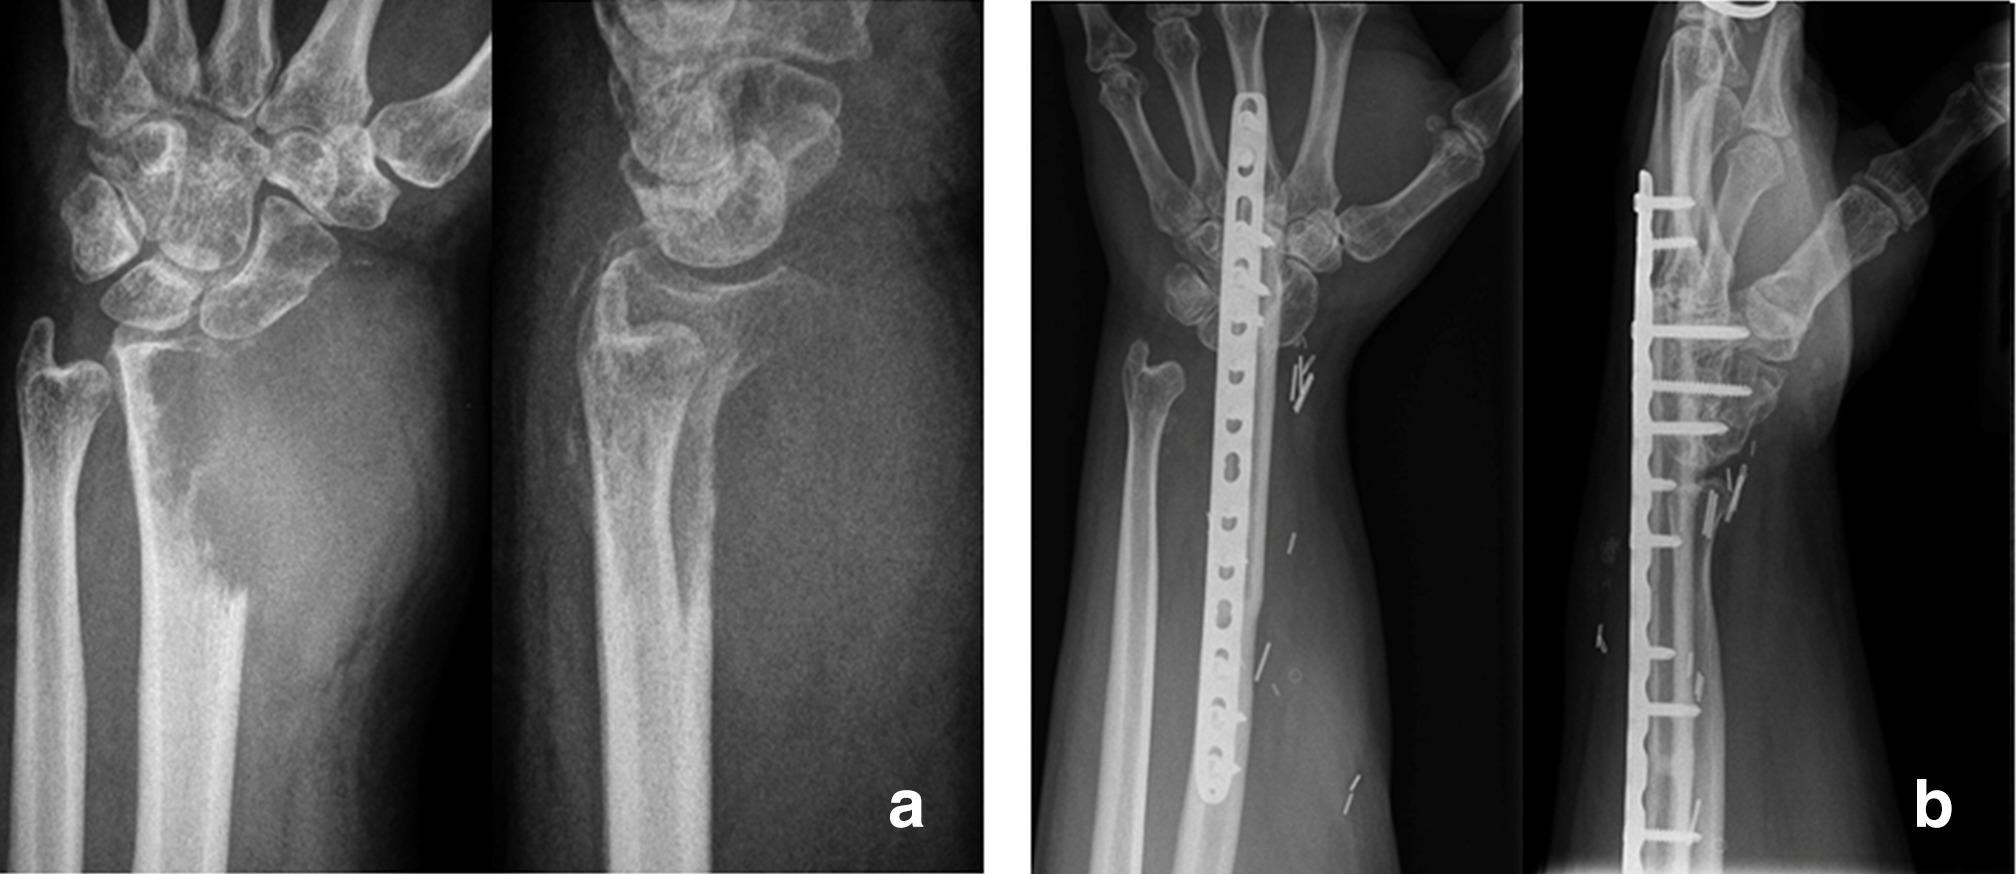 Fig. 3 
          a) 36-year-old patient with high-risk giant cell tumour of of the distal radius with cortical thinning and soft-tissue extension. b) En bloc resection was performed with wrist arthrodesis with osteoarticular allograft and plate fixation. There were no recurrences nor complications during 15-year follow-up.
        